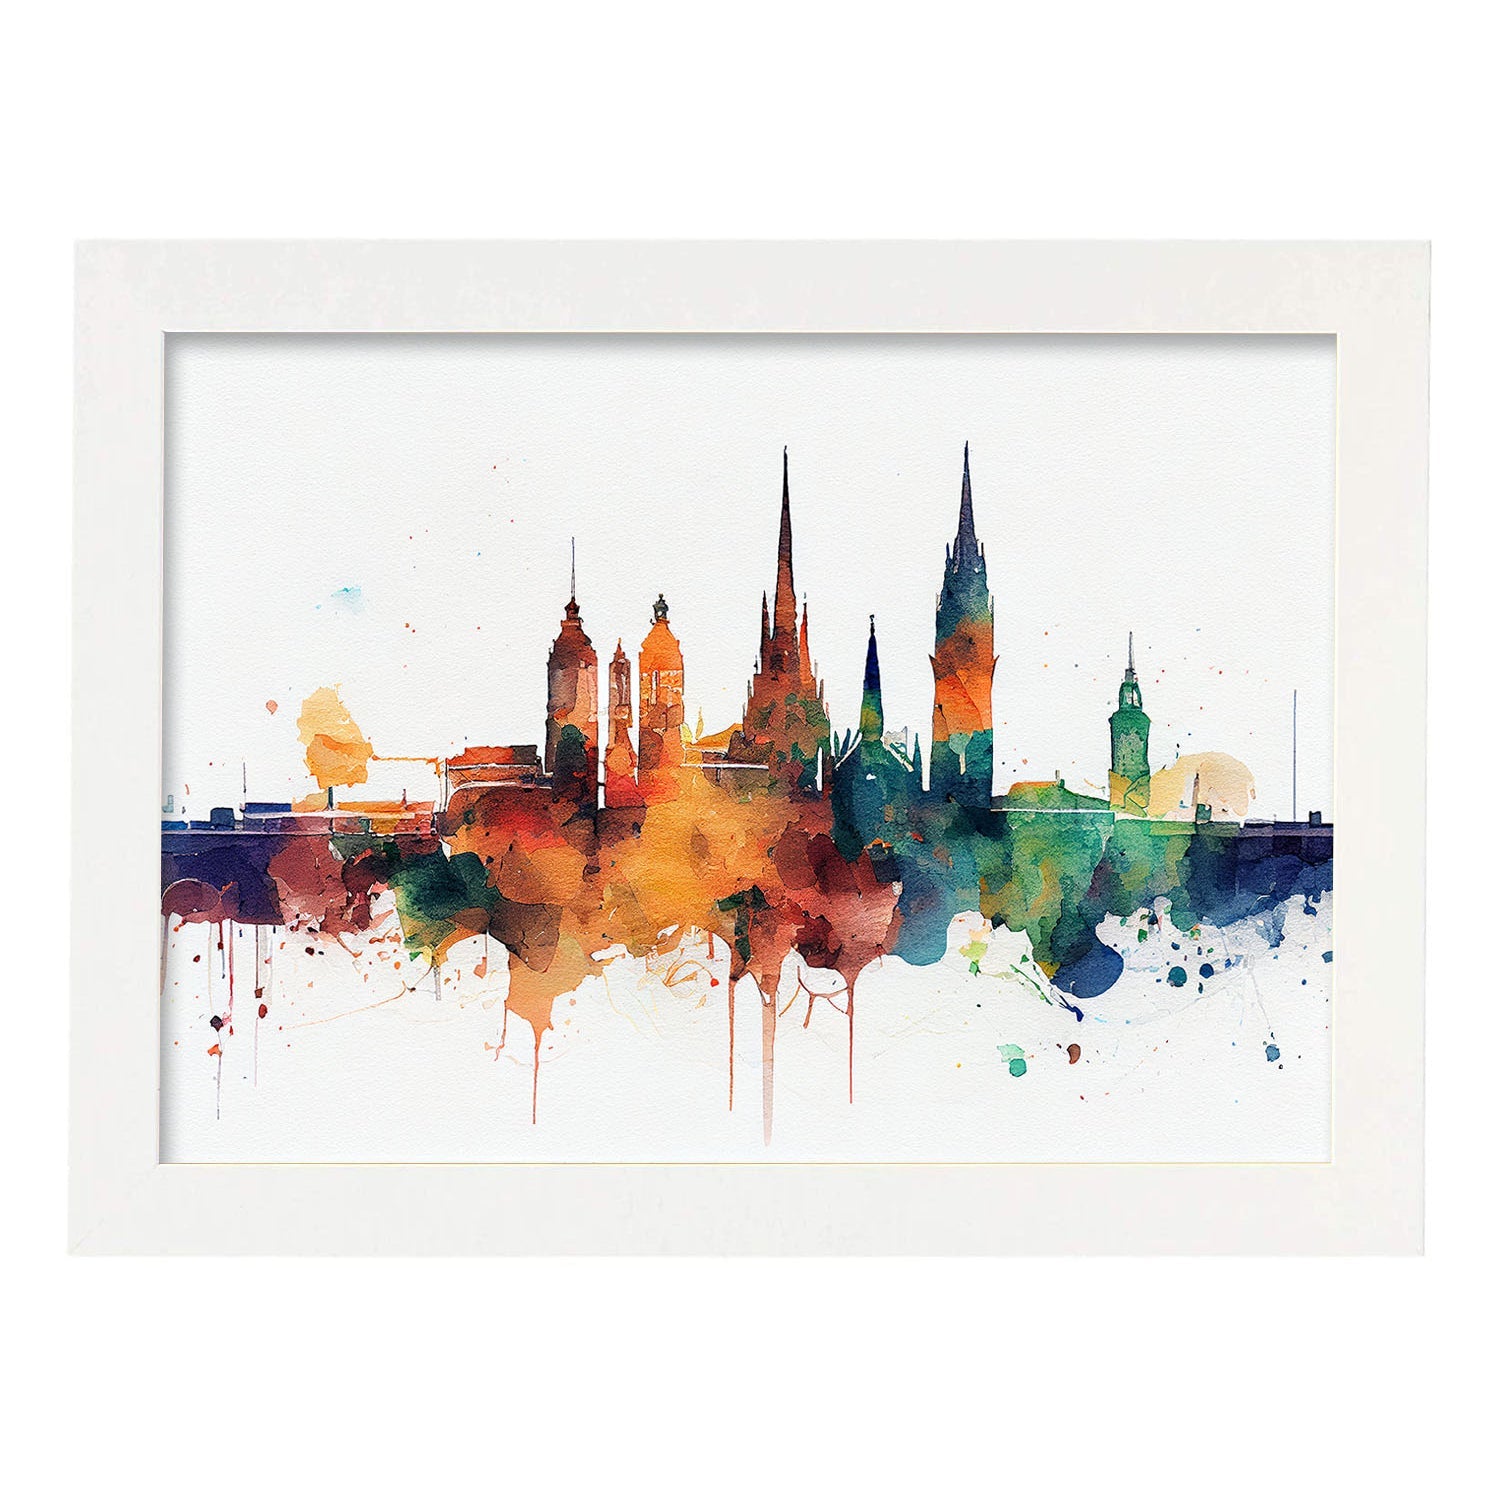 Nacnic watercolor of a skyline of the city of Vienna_1. Aesthetic Wall Art Prints for Bedroom or Living Room Design.-Artwork-Nacnic-A4-Marco Blanco-Nacnic Estudio SL